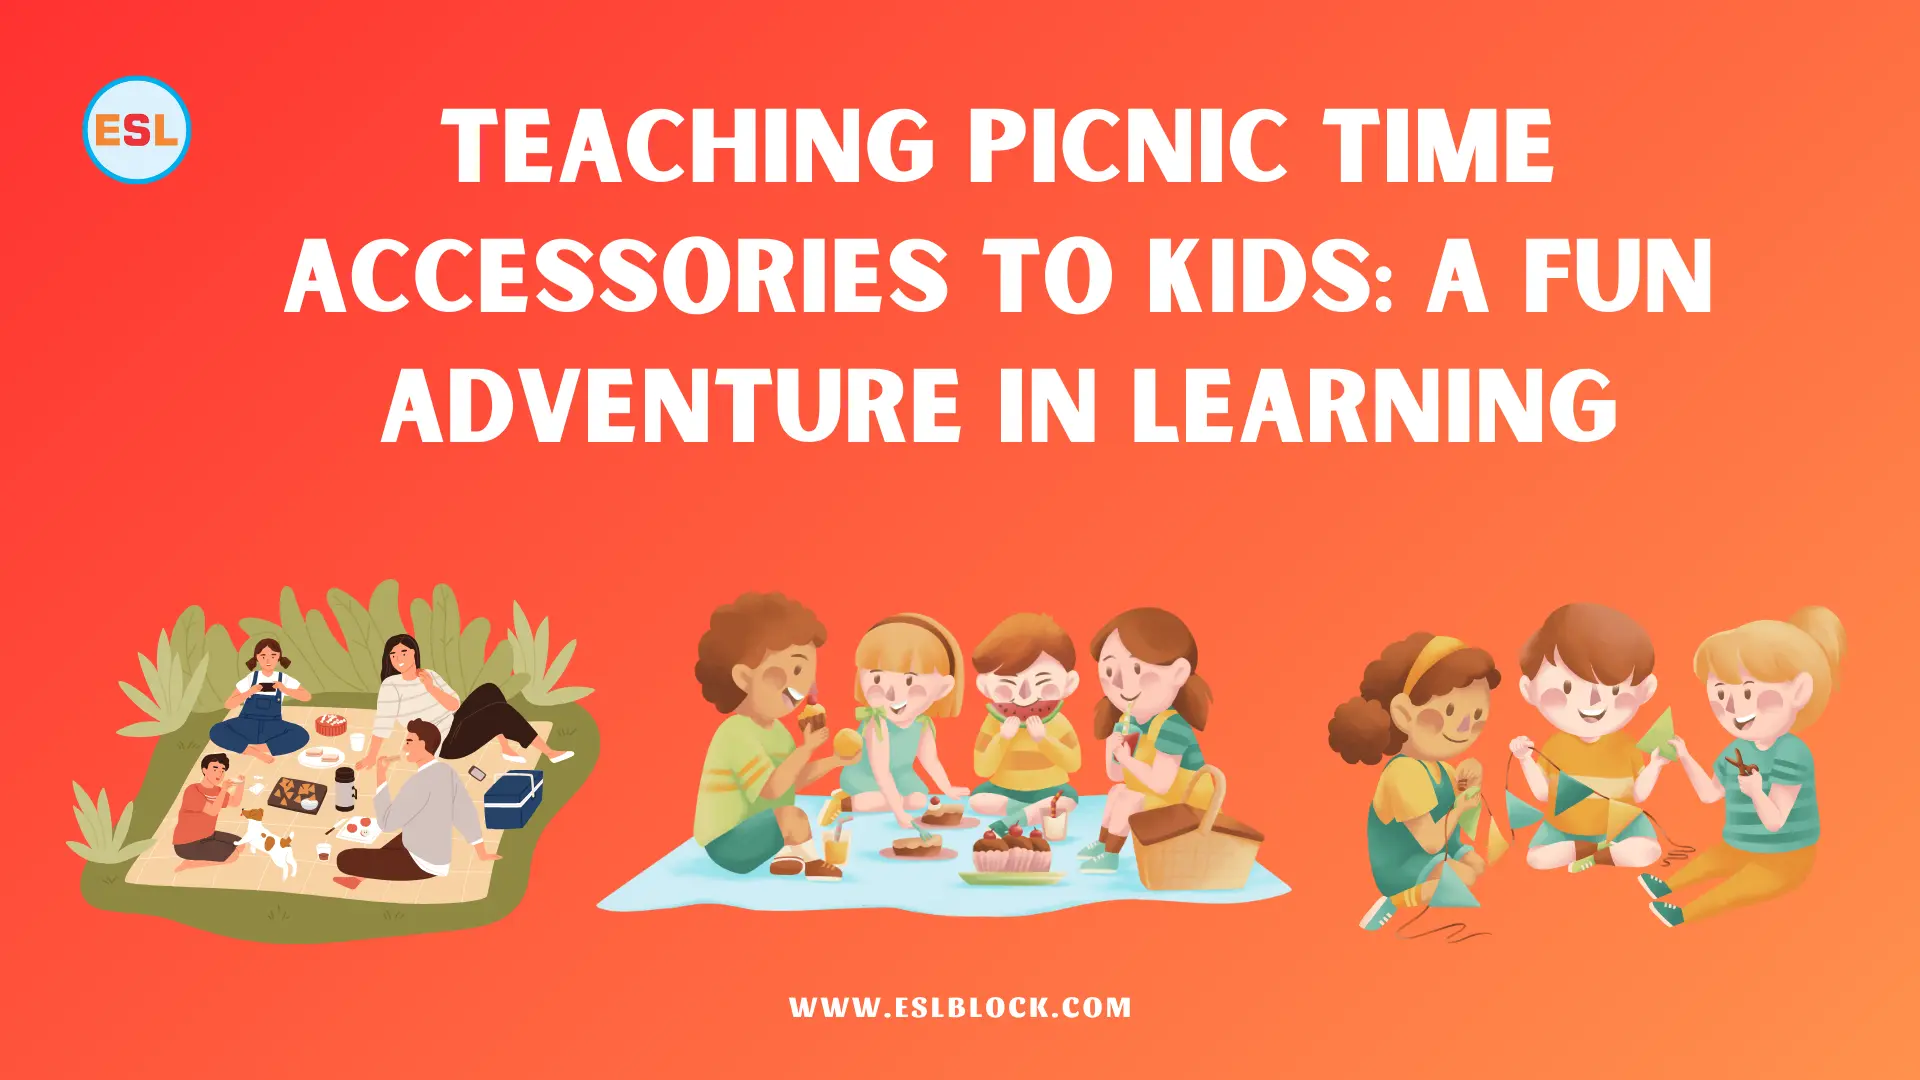 Teaching Picnic Time Accessories to Kids A Fun Adventure in Learning